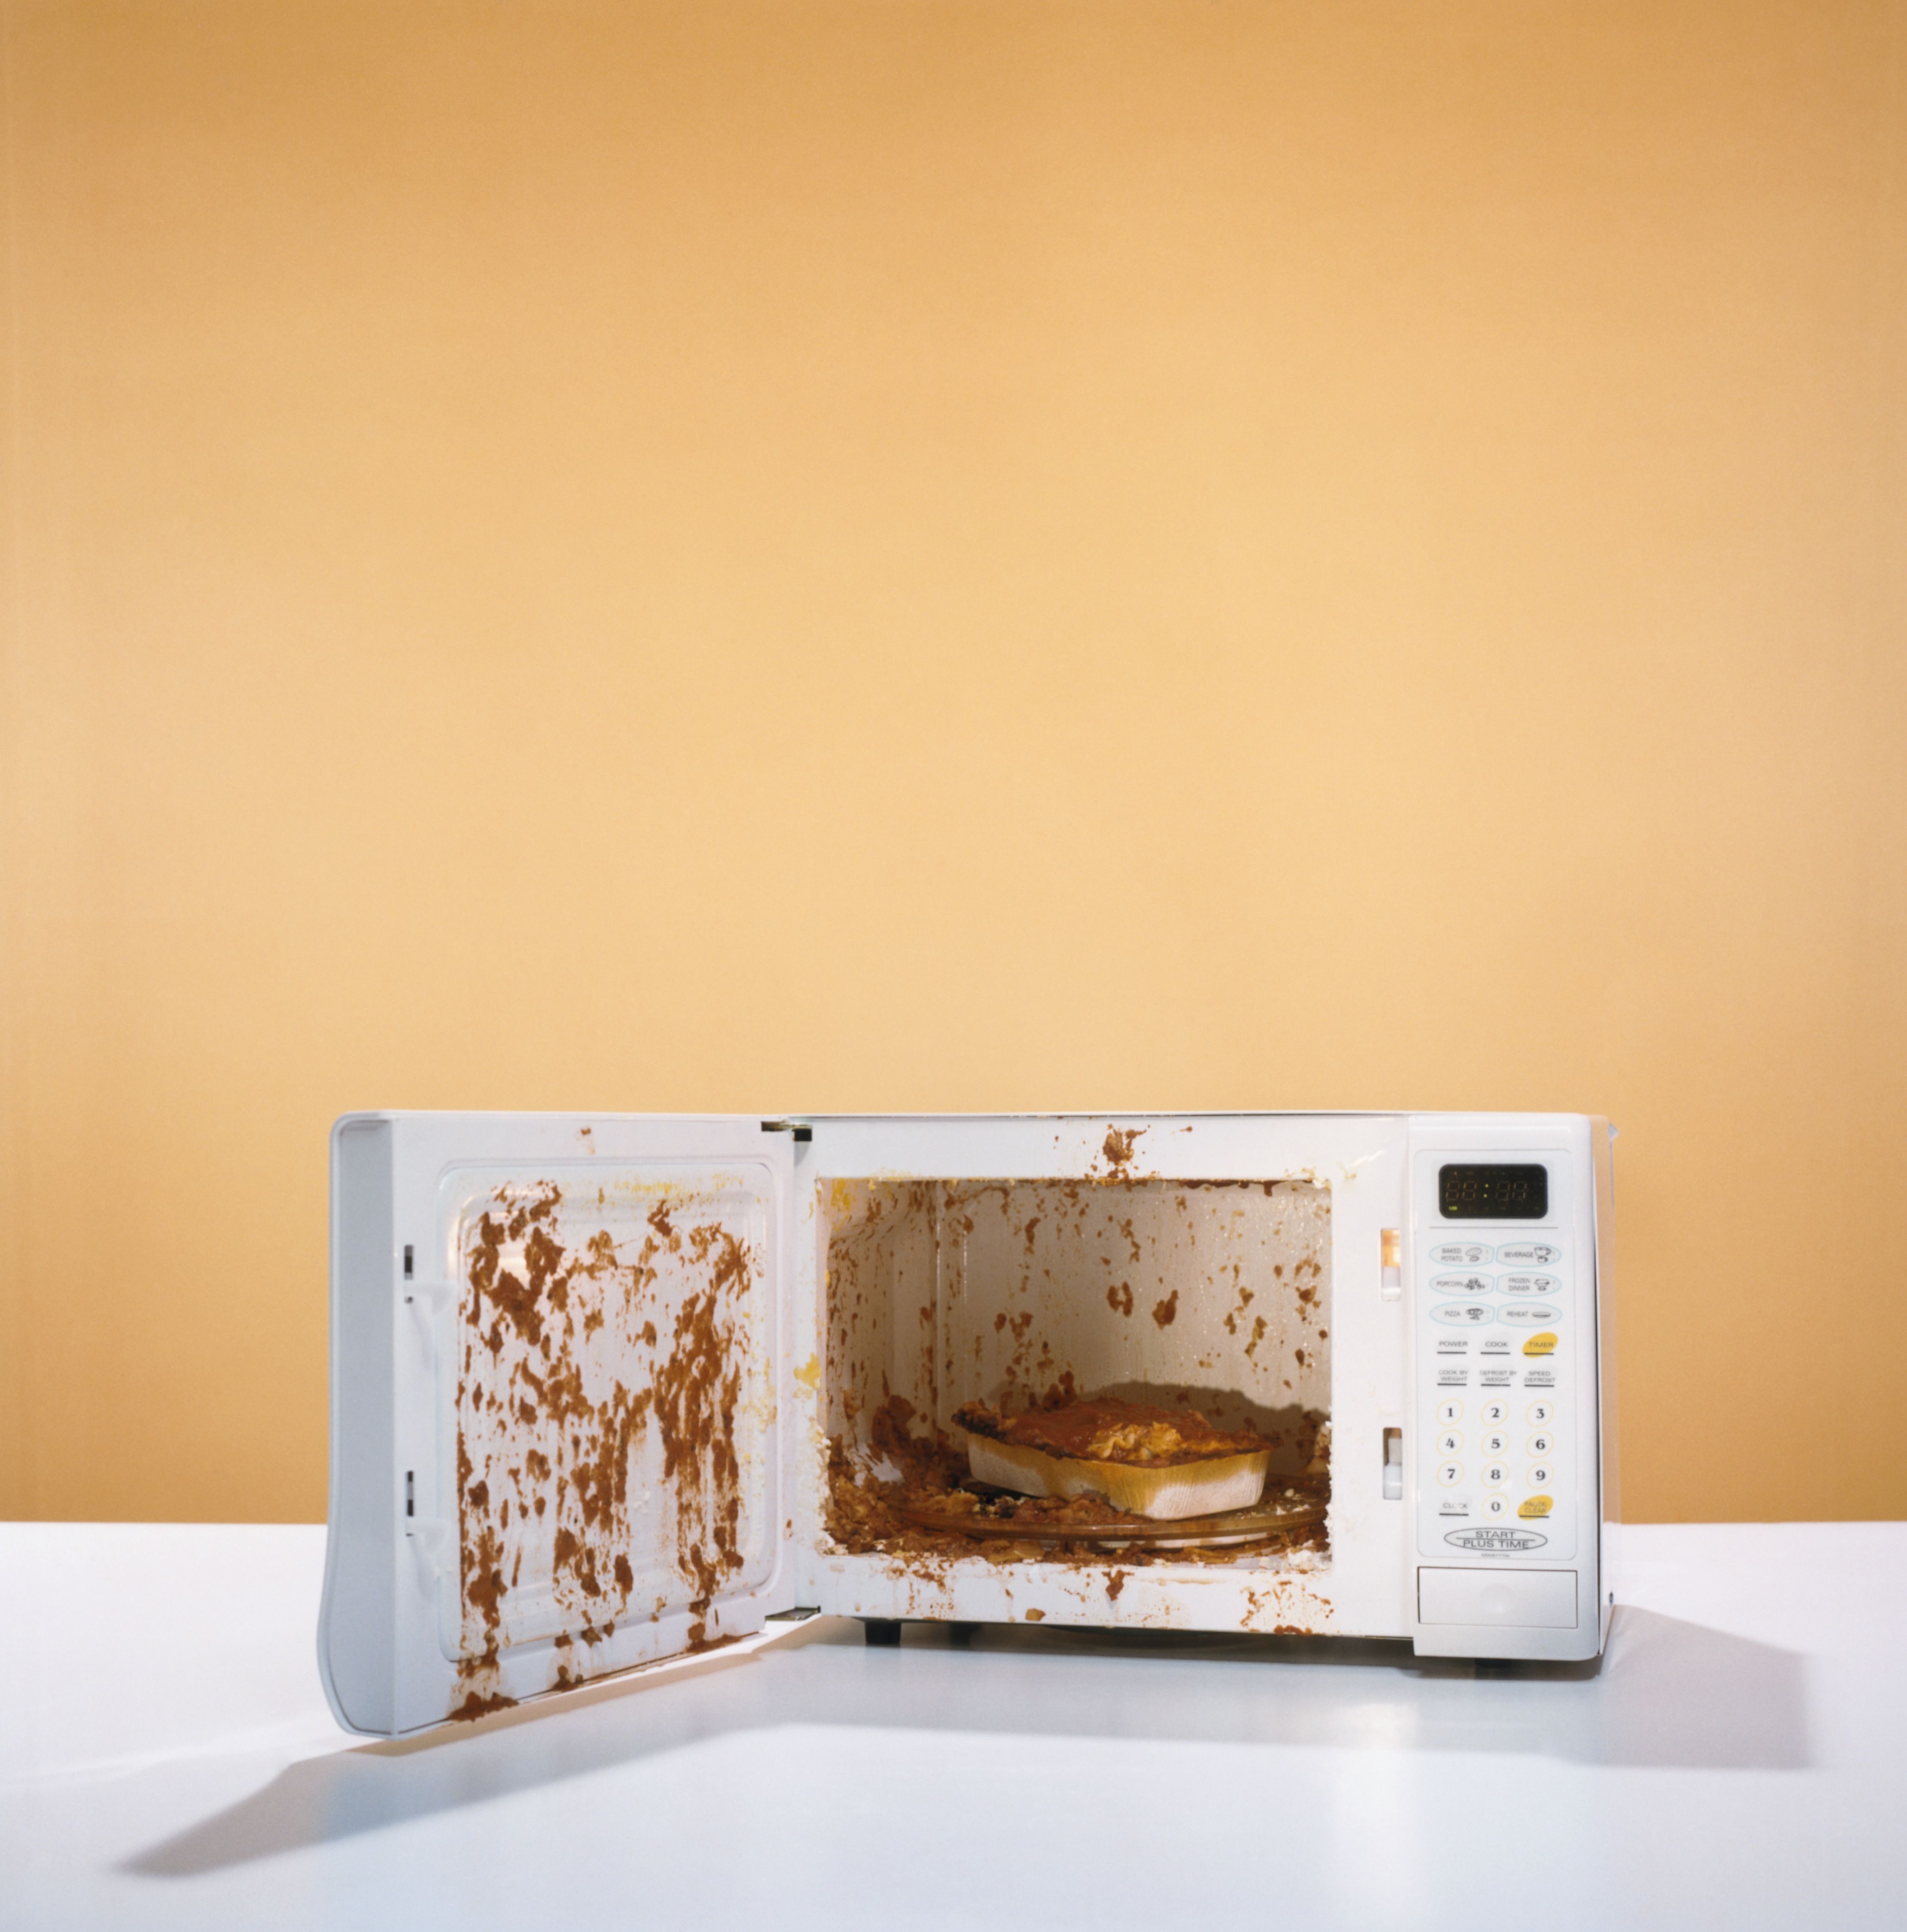 The Best Way to Clean Dirty Microwave Oven At Home 